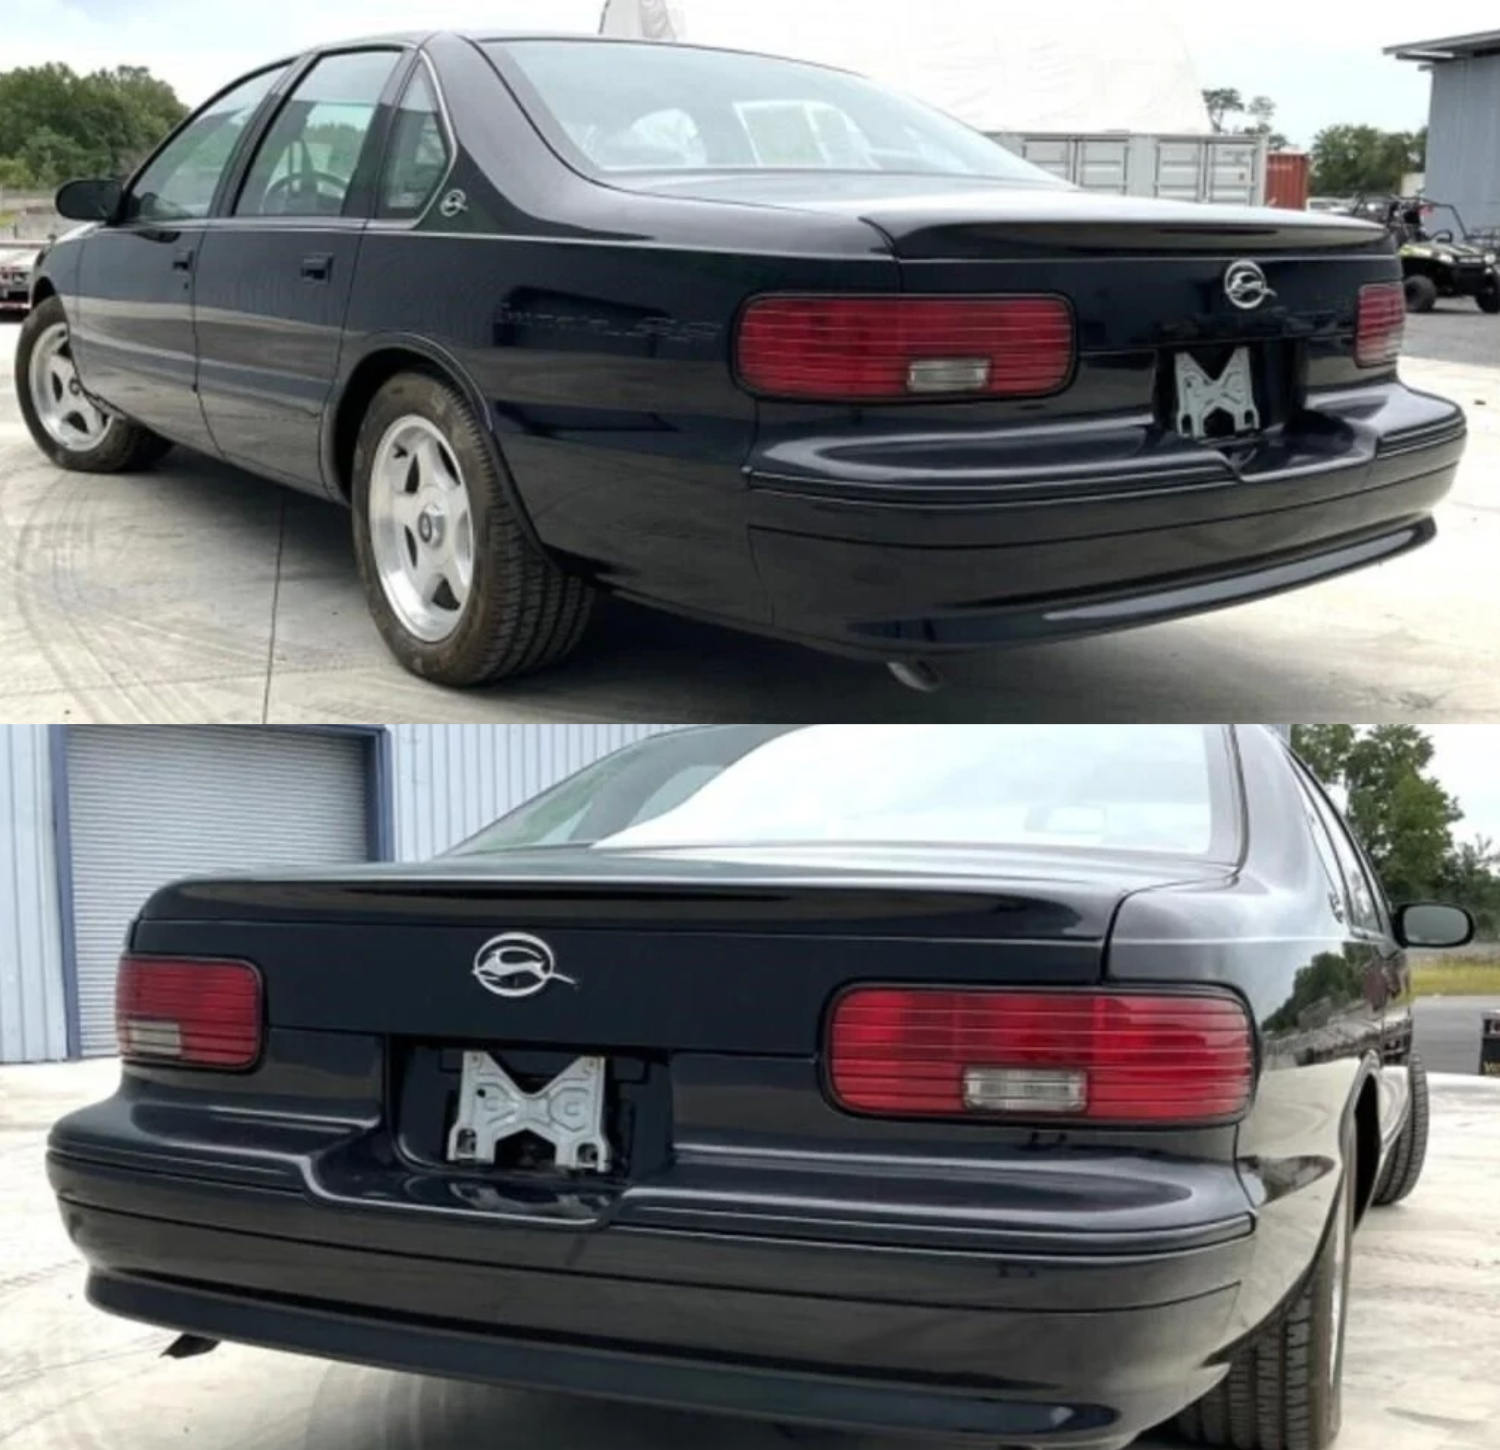 1996 Chevy Impala SS back end